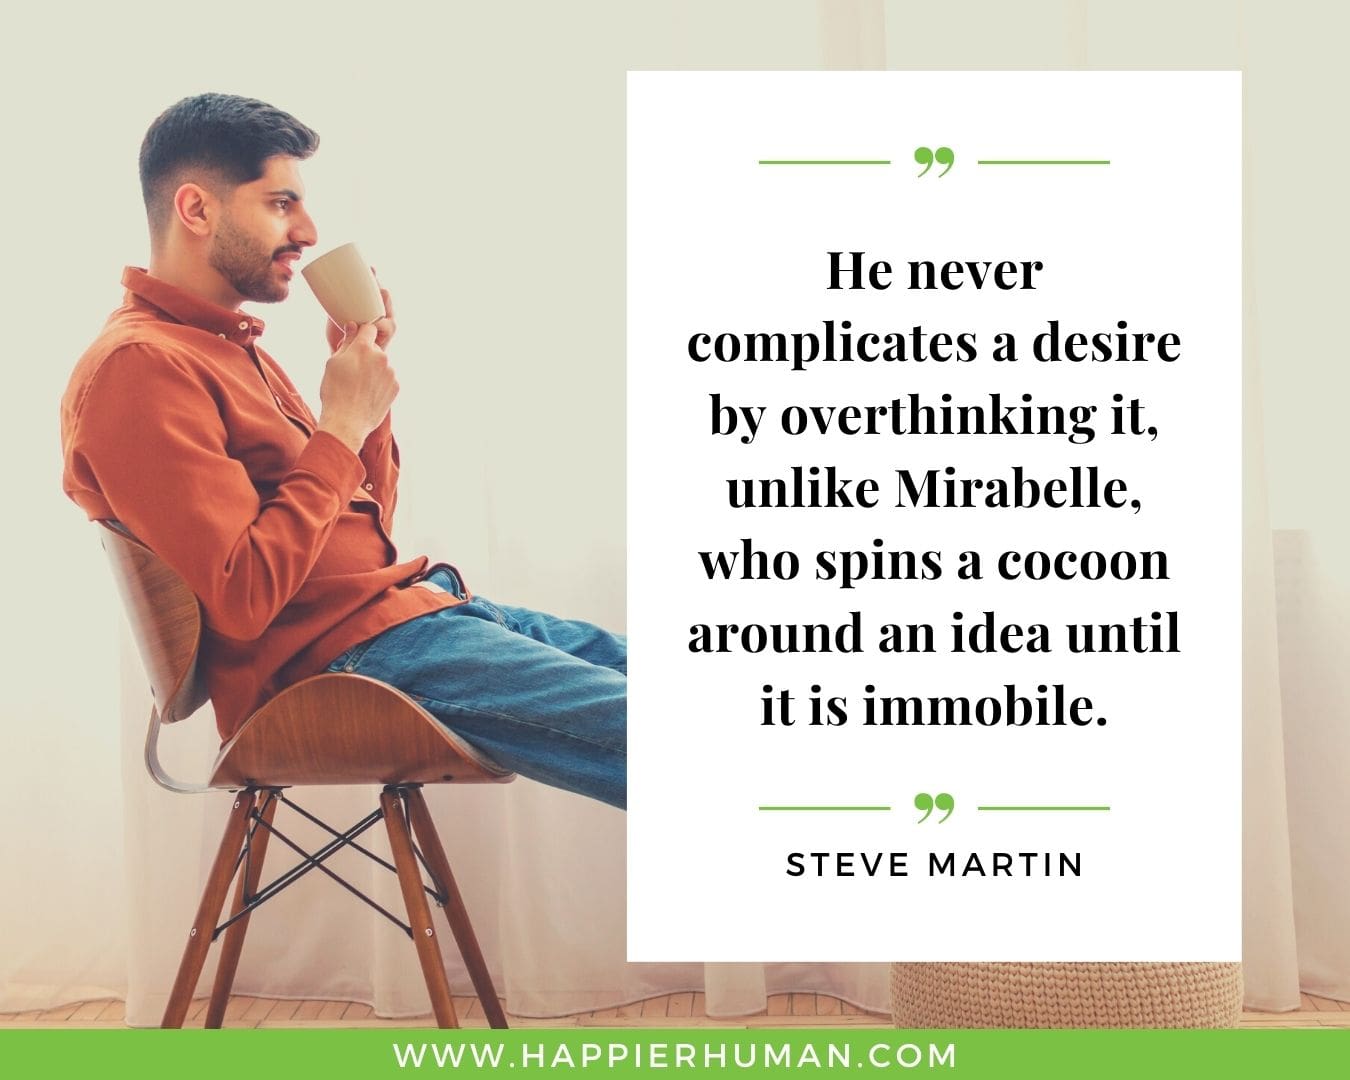 Overthinking Quotes - “He never complicates a desire by overthinking it, unlike Mirabelle, who spins a cocoon around an idea until it is immobile.” - Steve Martin